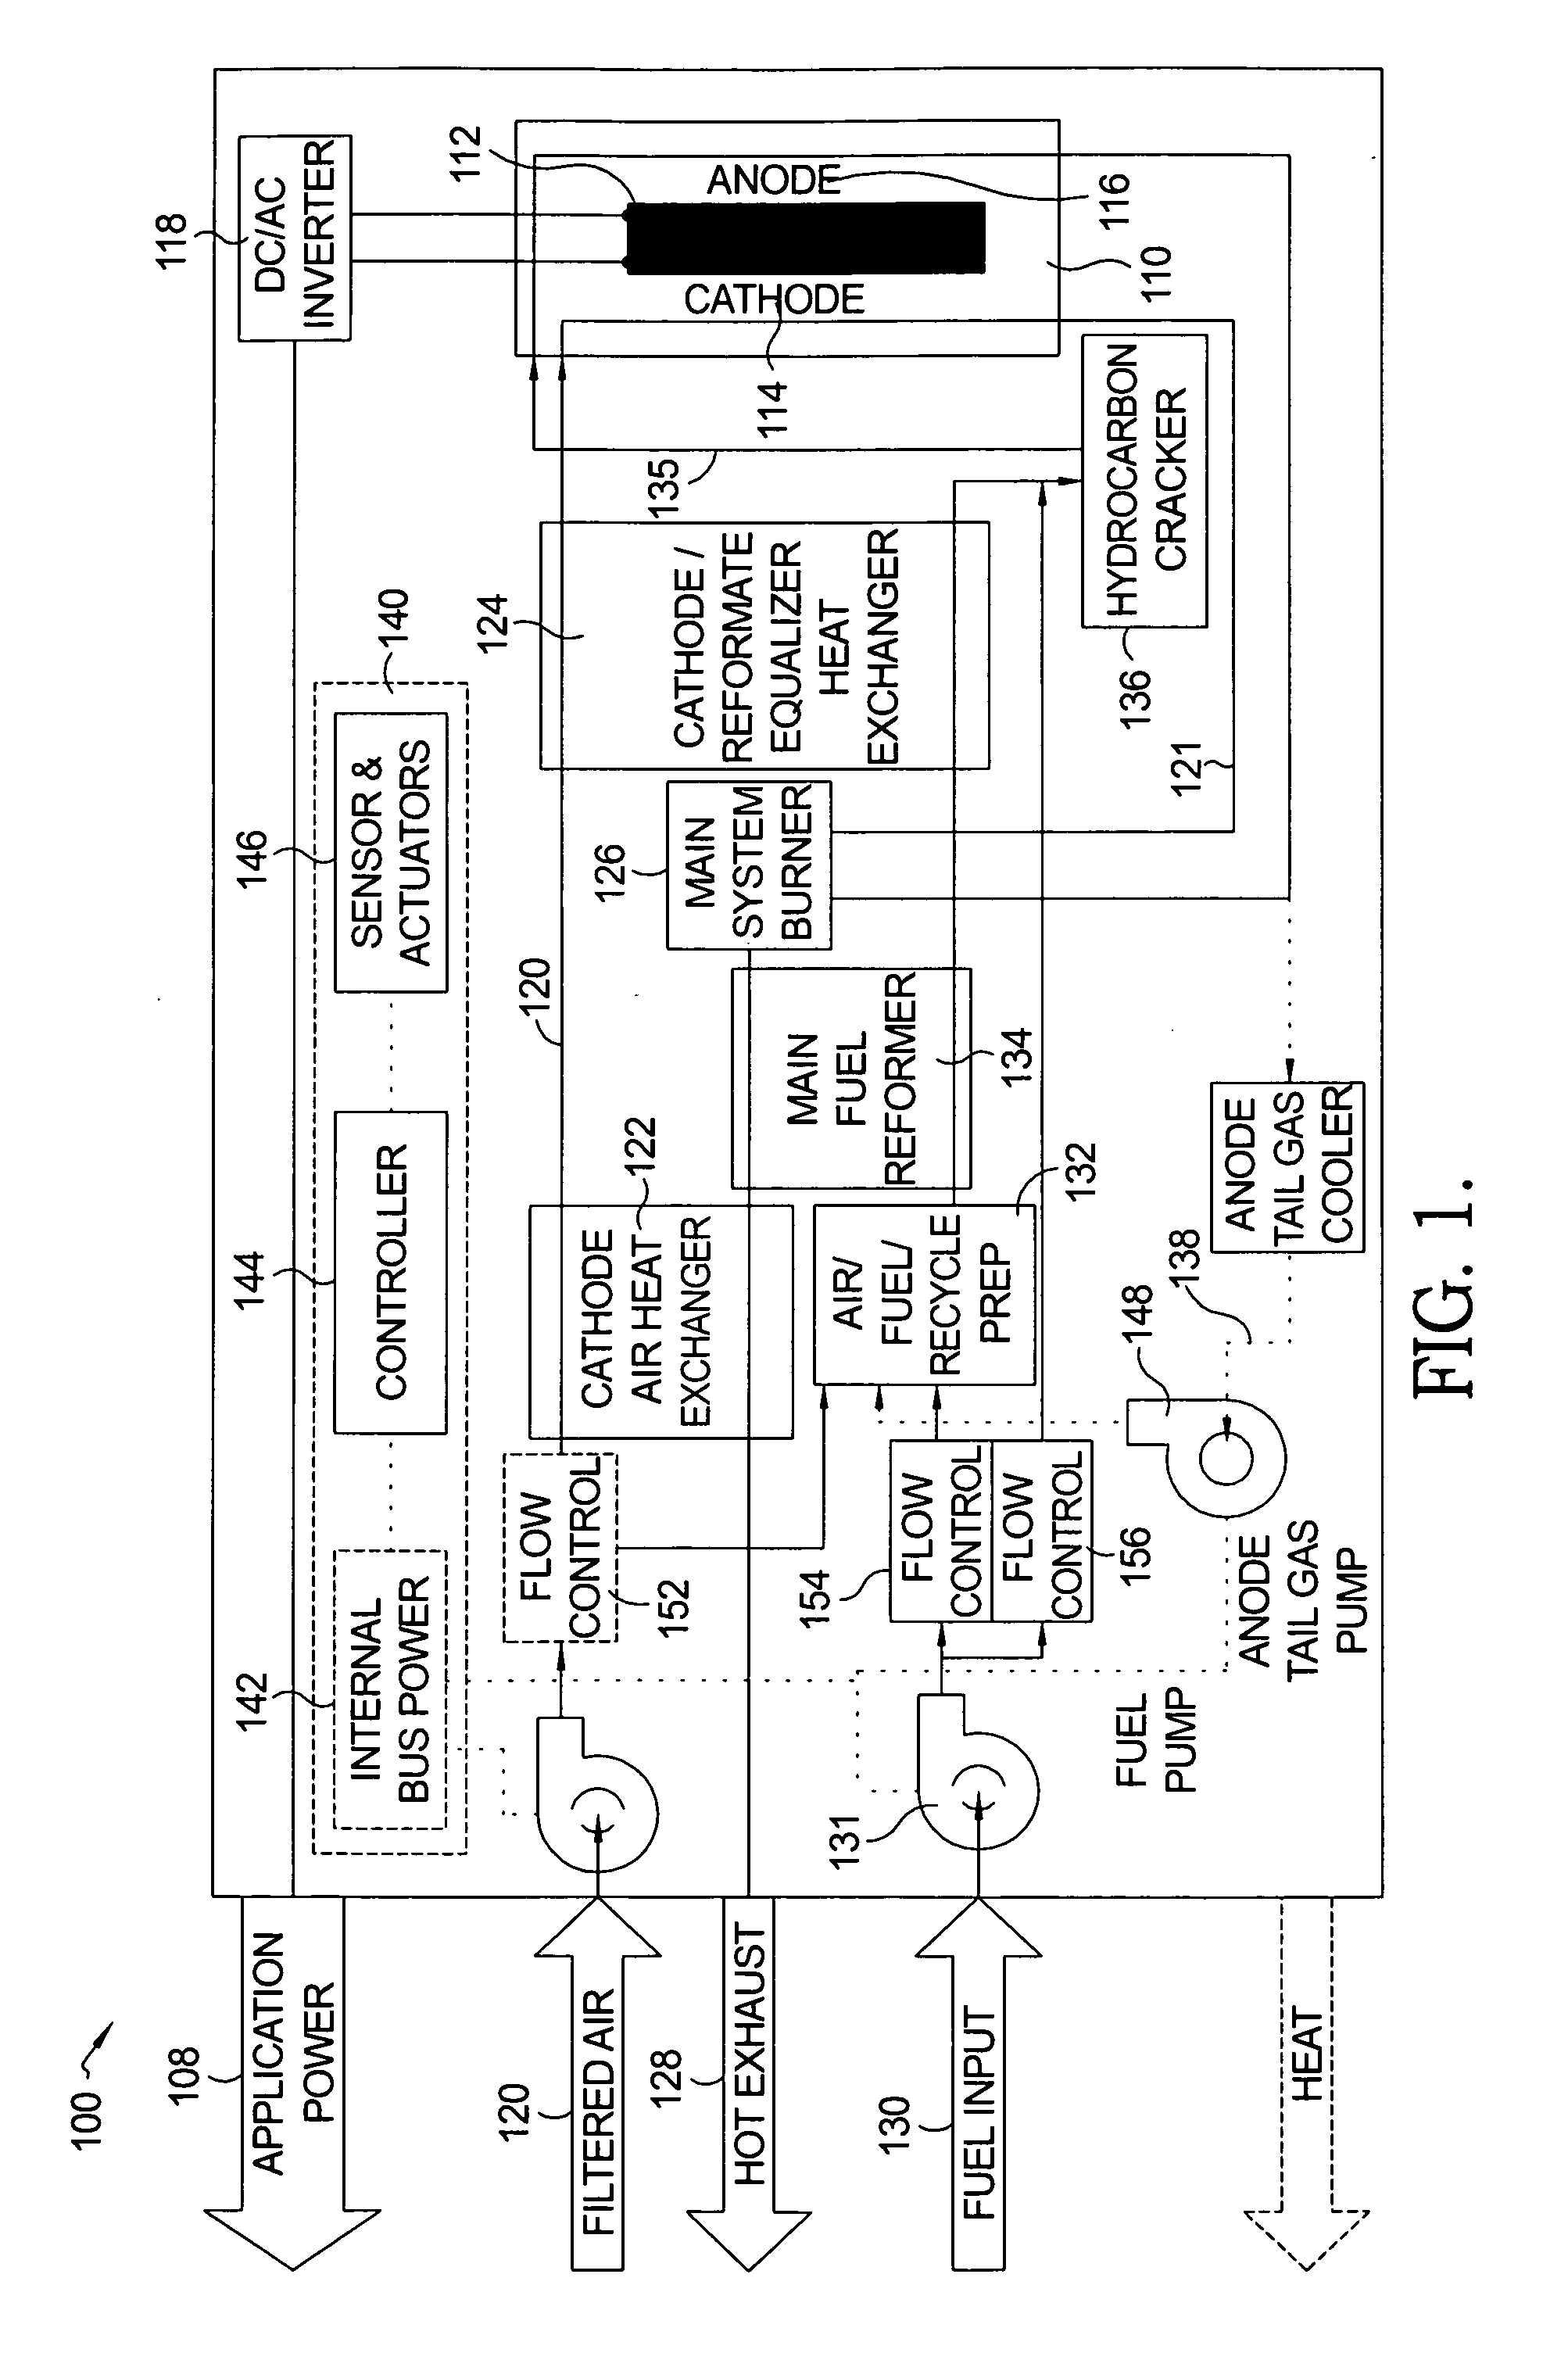 Method and apparatus for anode oxidation prevention and cooling of a solid-oxide fuel cell stack